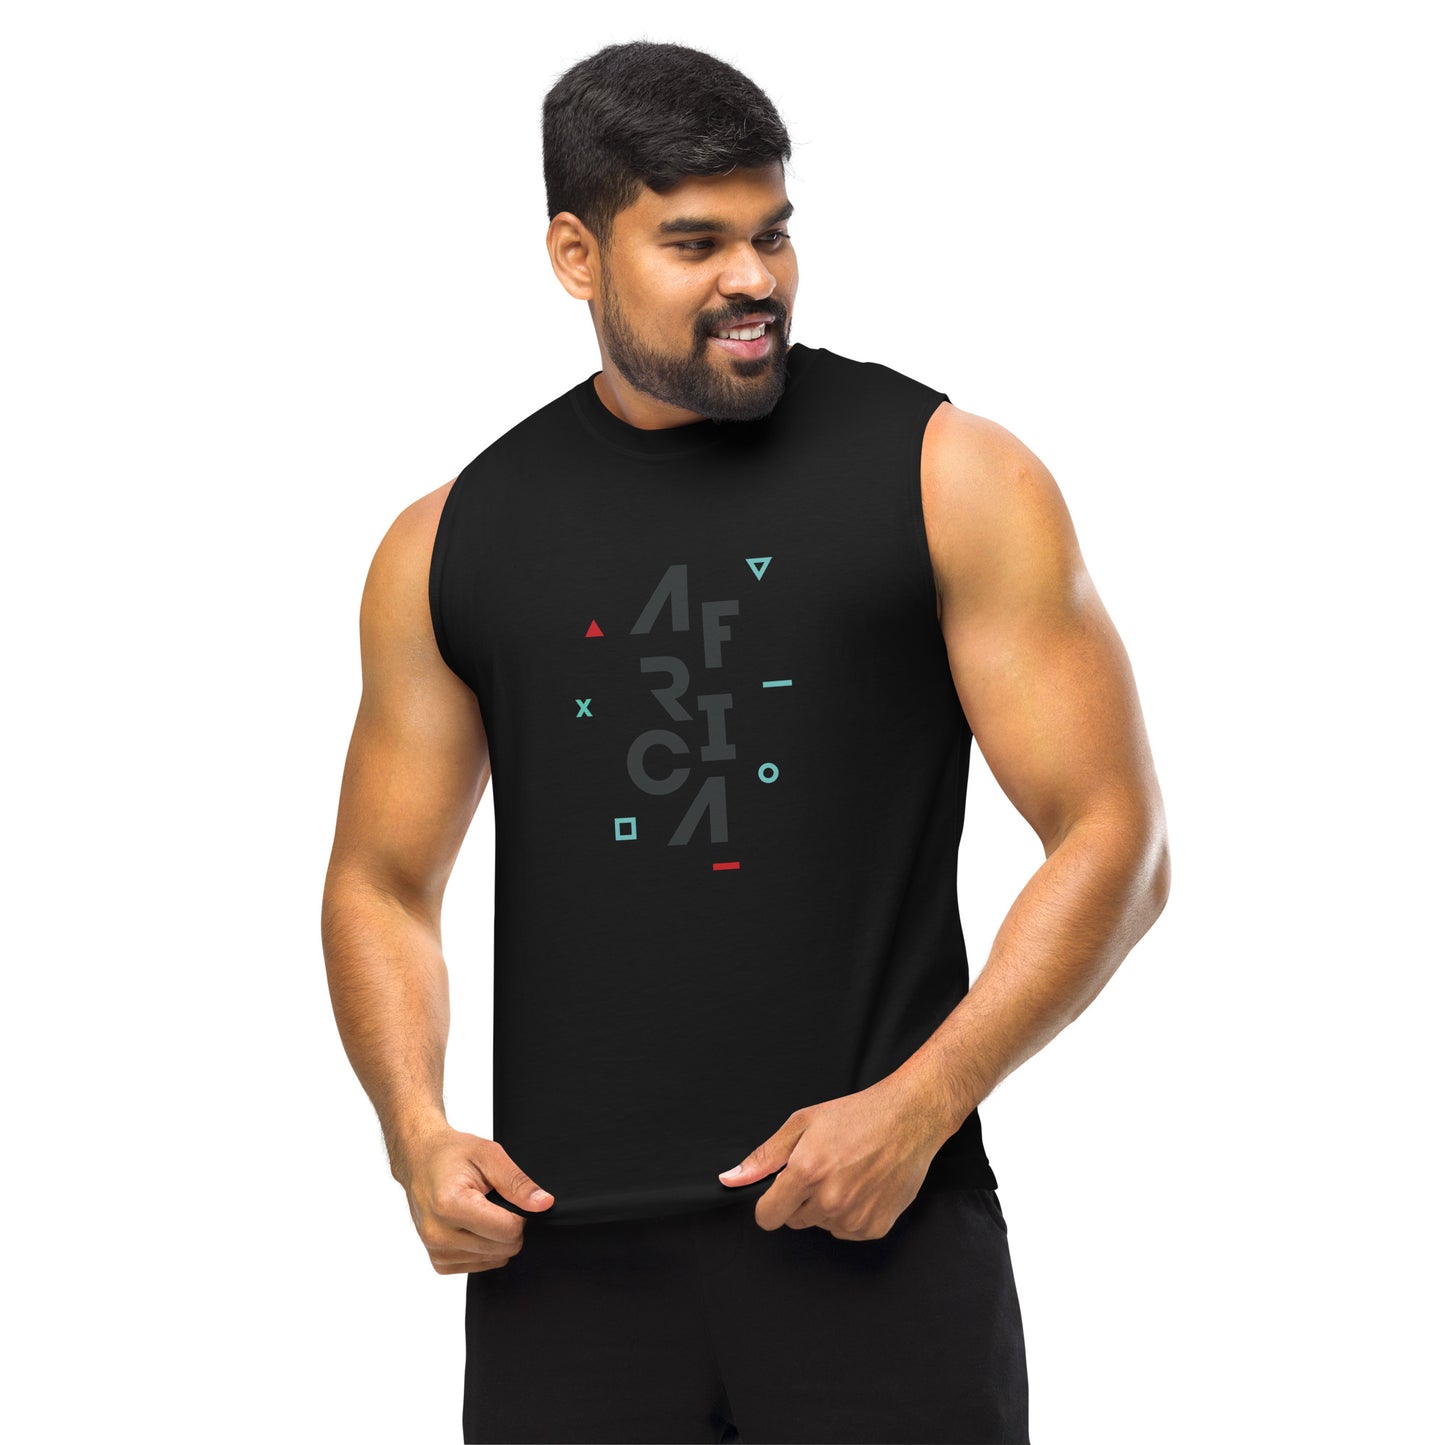 AFRICA IS THE FUTURE Muscle Shirt